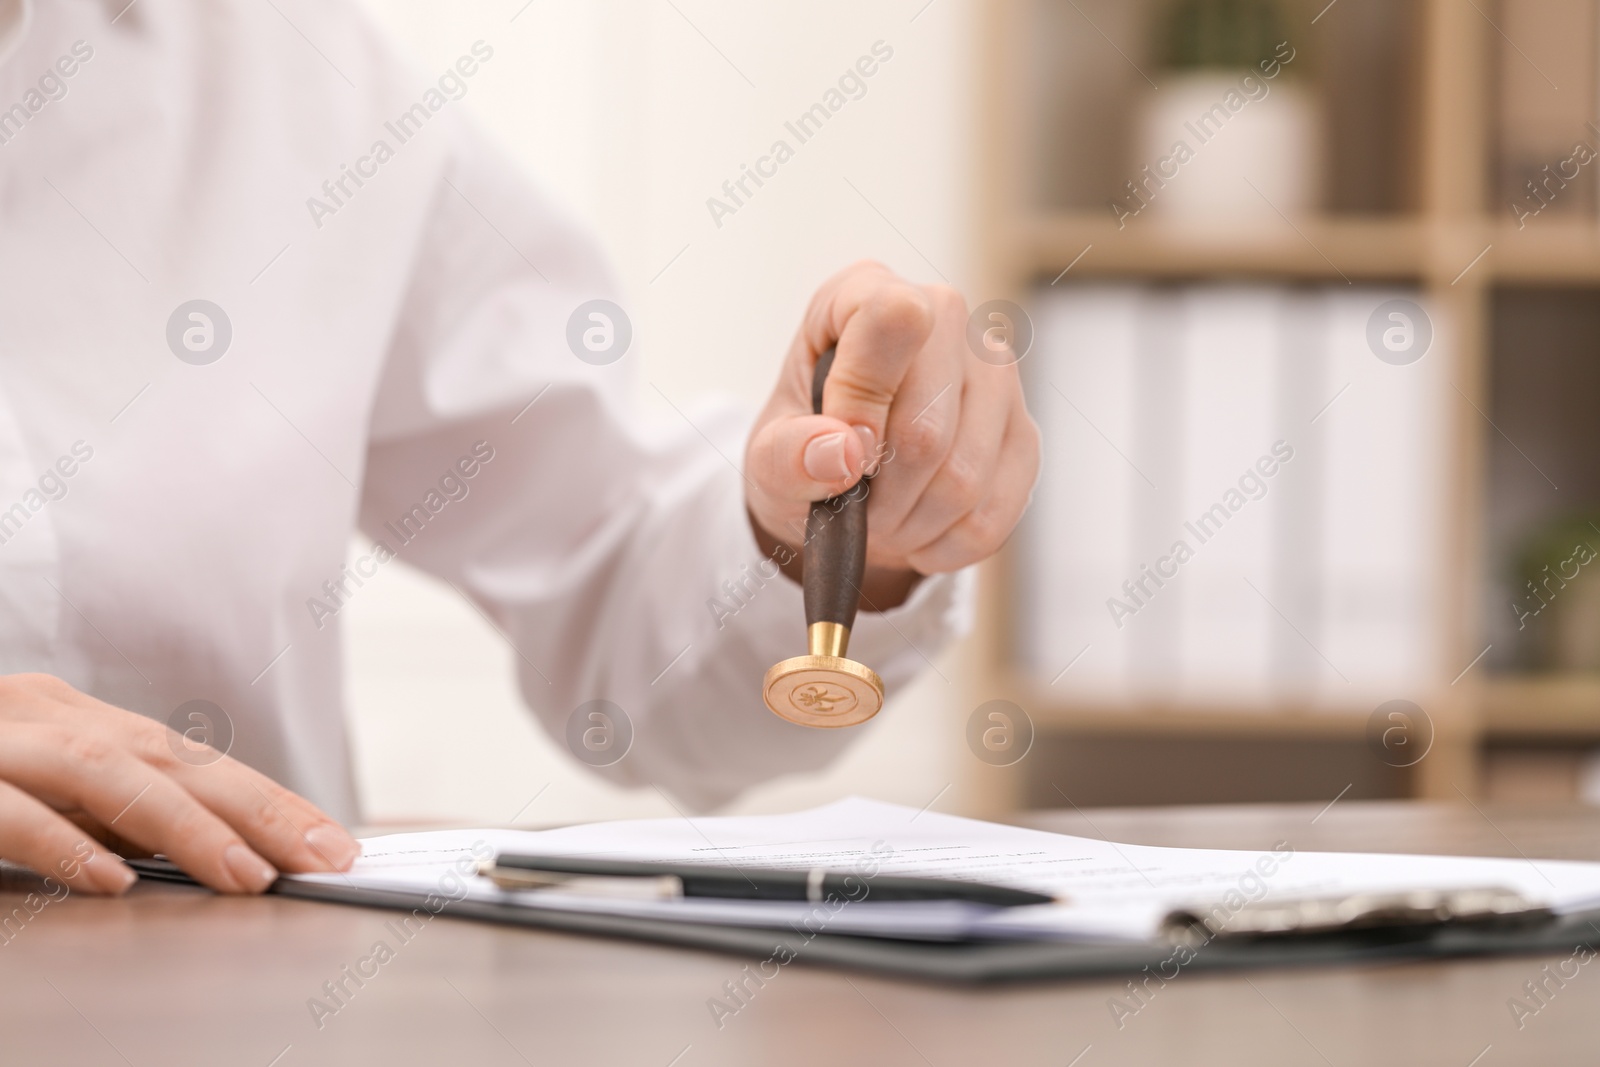 Photo of Woman stamping document at table, closeup view